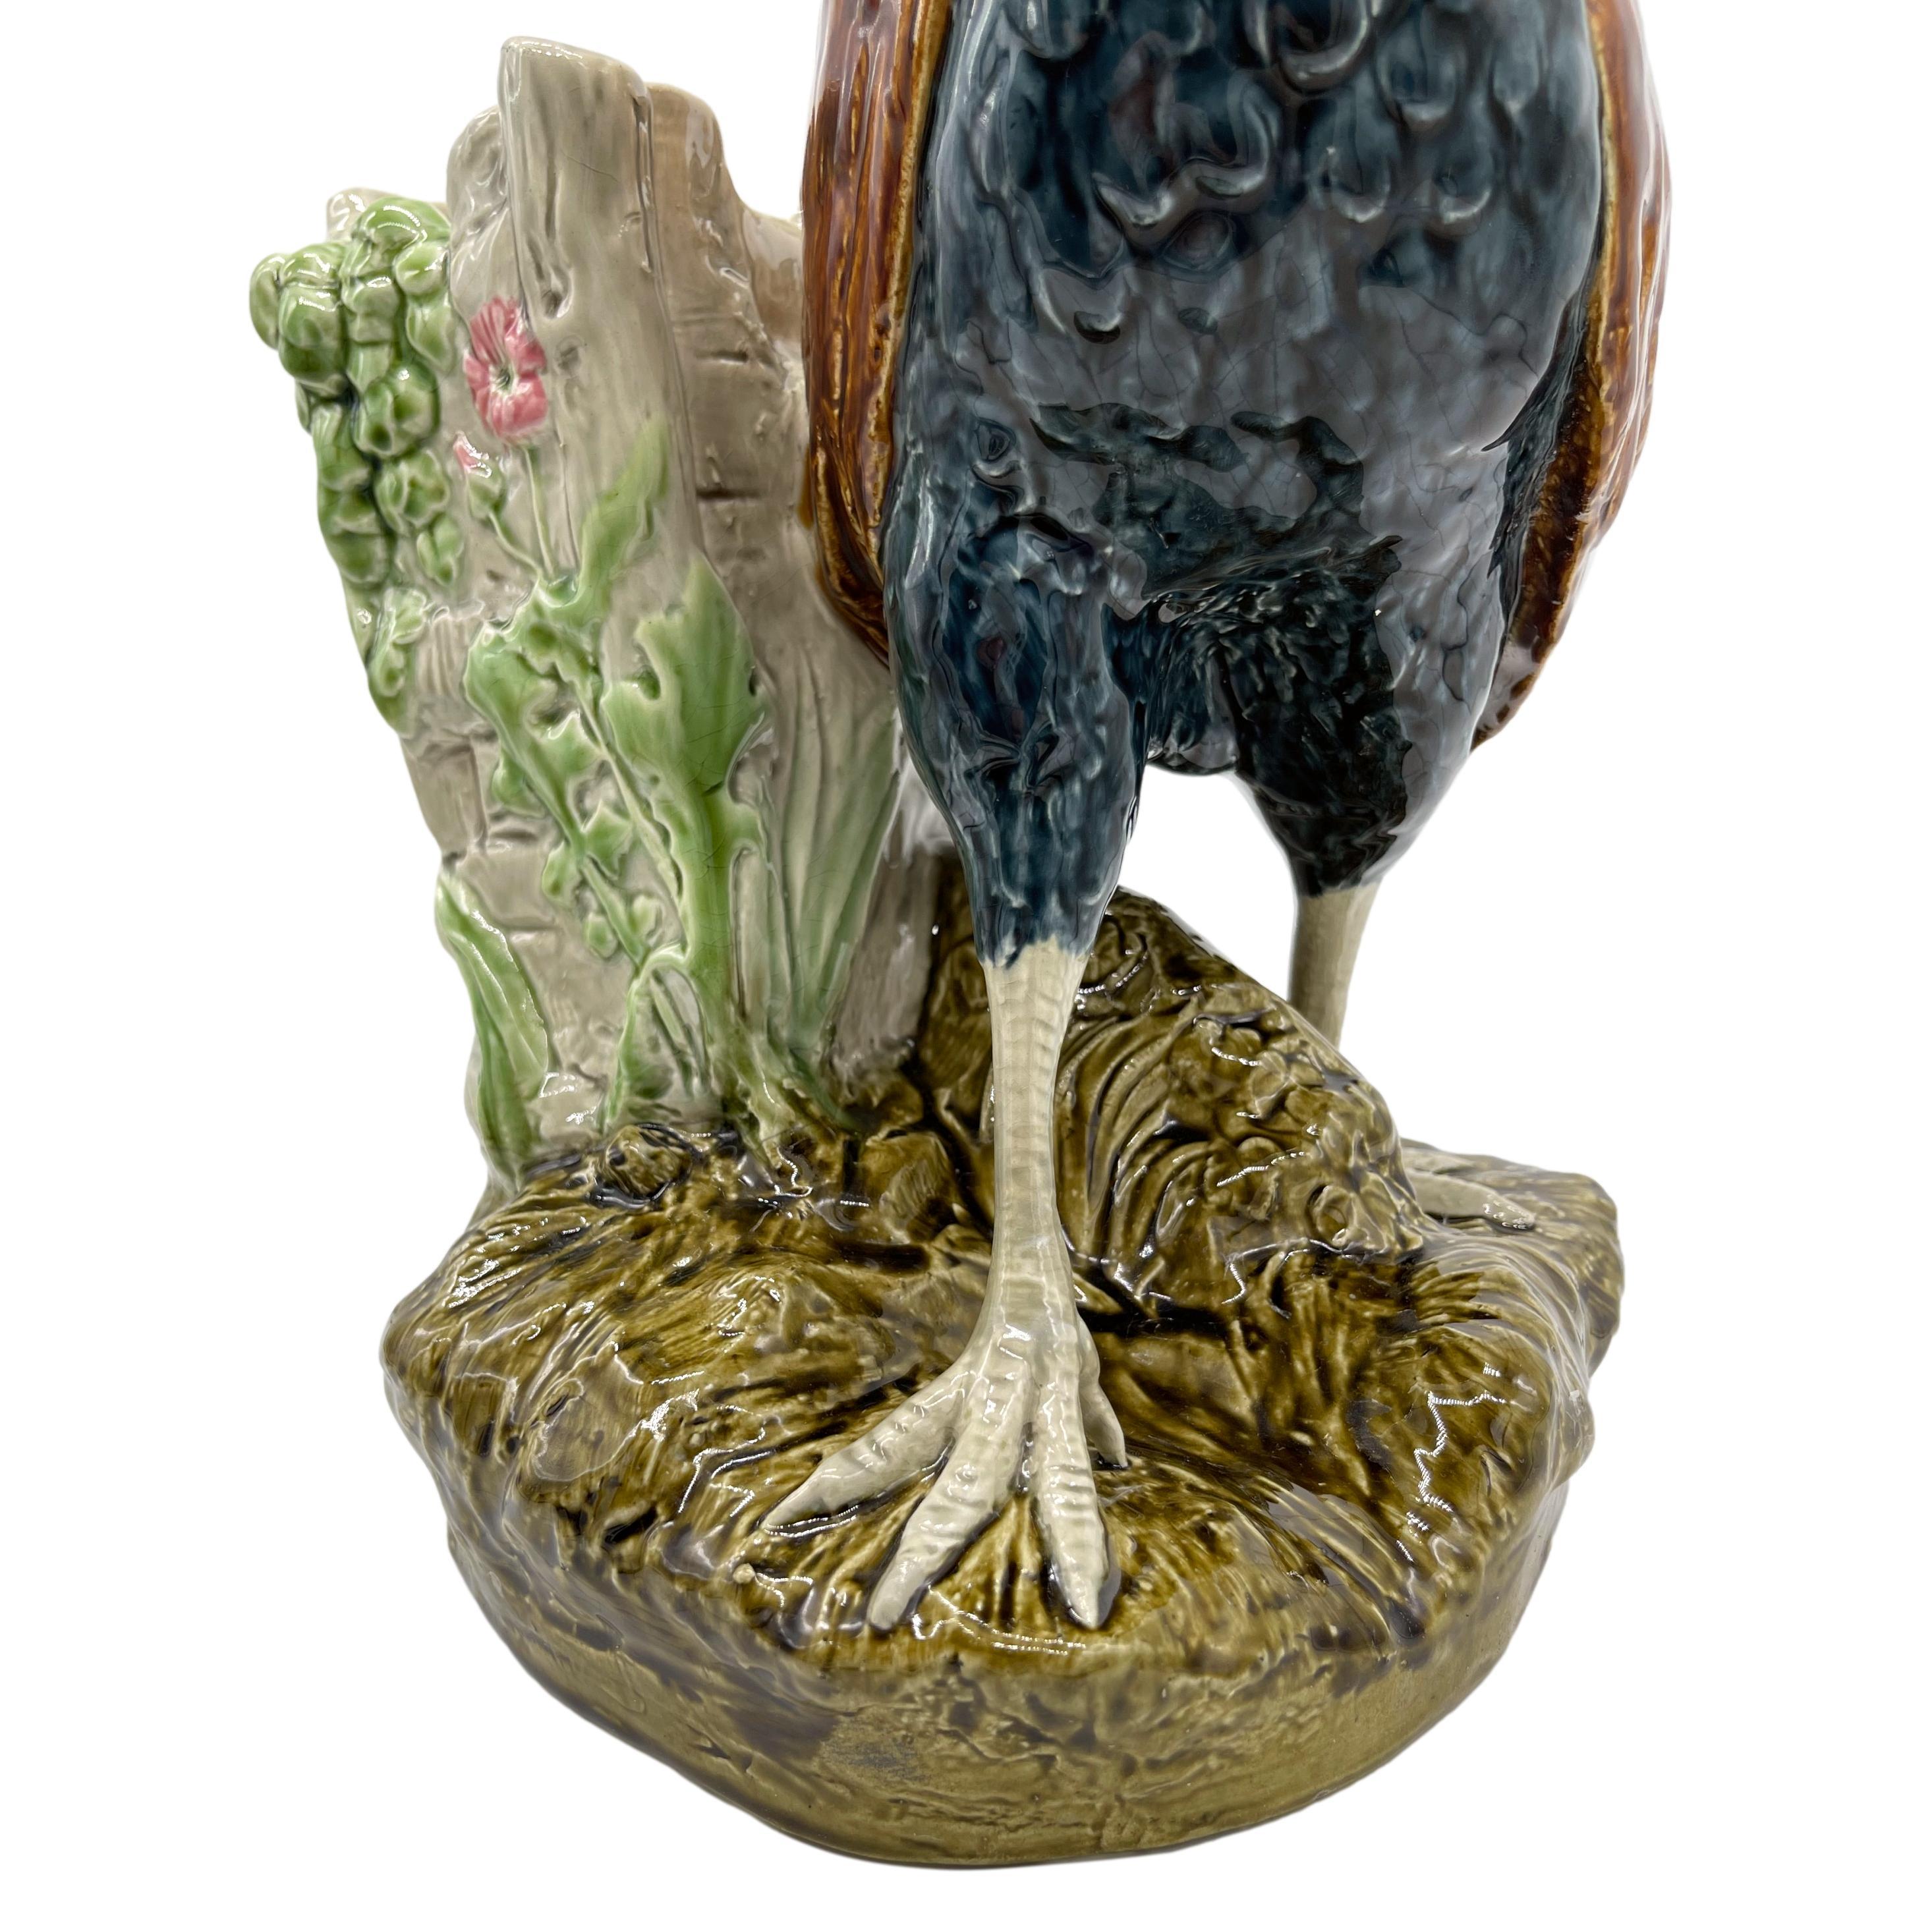 Majolica Rooster Large Spill Vase Signed Louis Carrier-Belleuse, French, ca 1890 For Sale 7